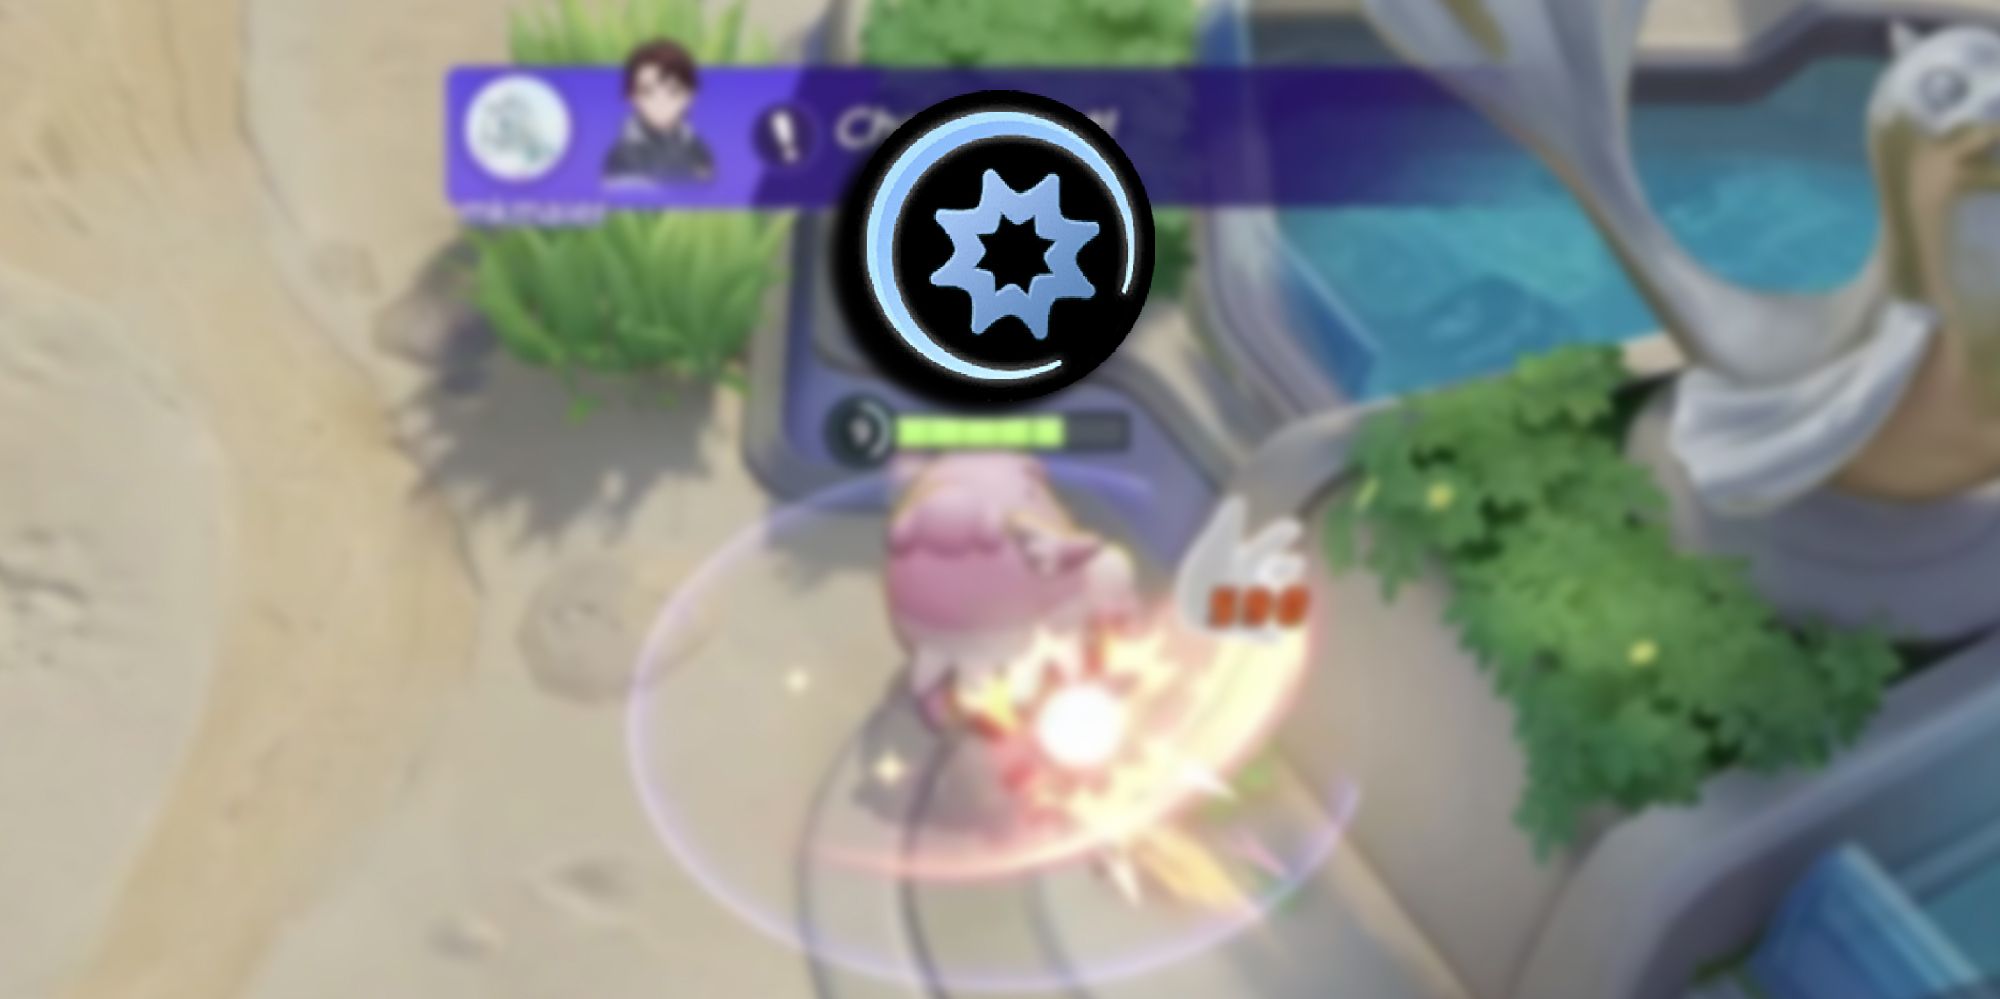 Pokemon Unite - Blissey Using Their Boosted Basic Attack With The PNG Icon For Basic Attack Passives Overlaid On Top